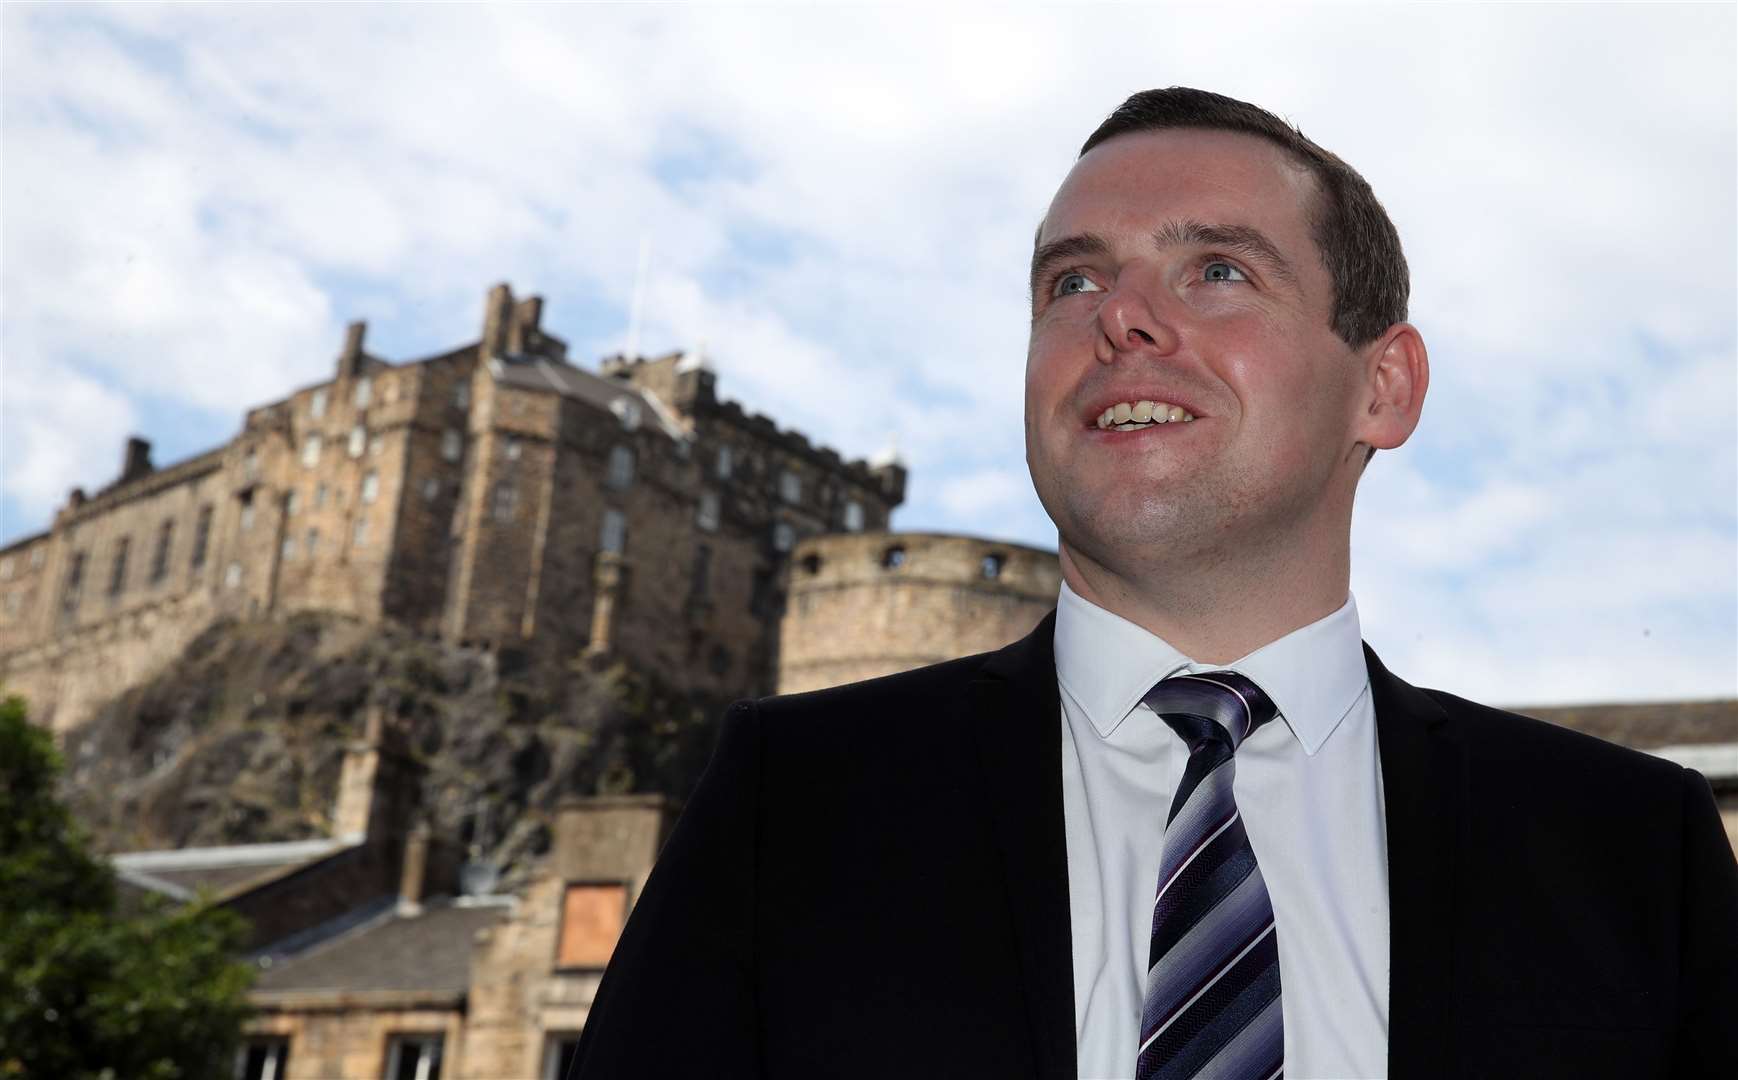 Scottish Conservative leader Douglas Ross said Margaret Ferrier’s excuses for breaching coronavirus rules were ‘mortifying and shameless’ (Andrew Milligan/PA)